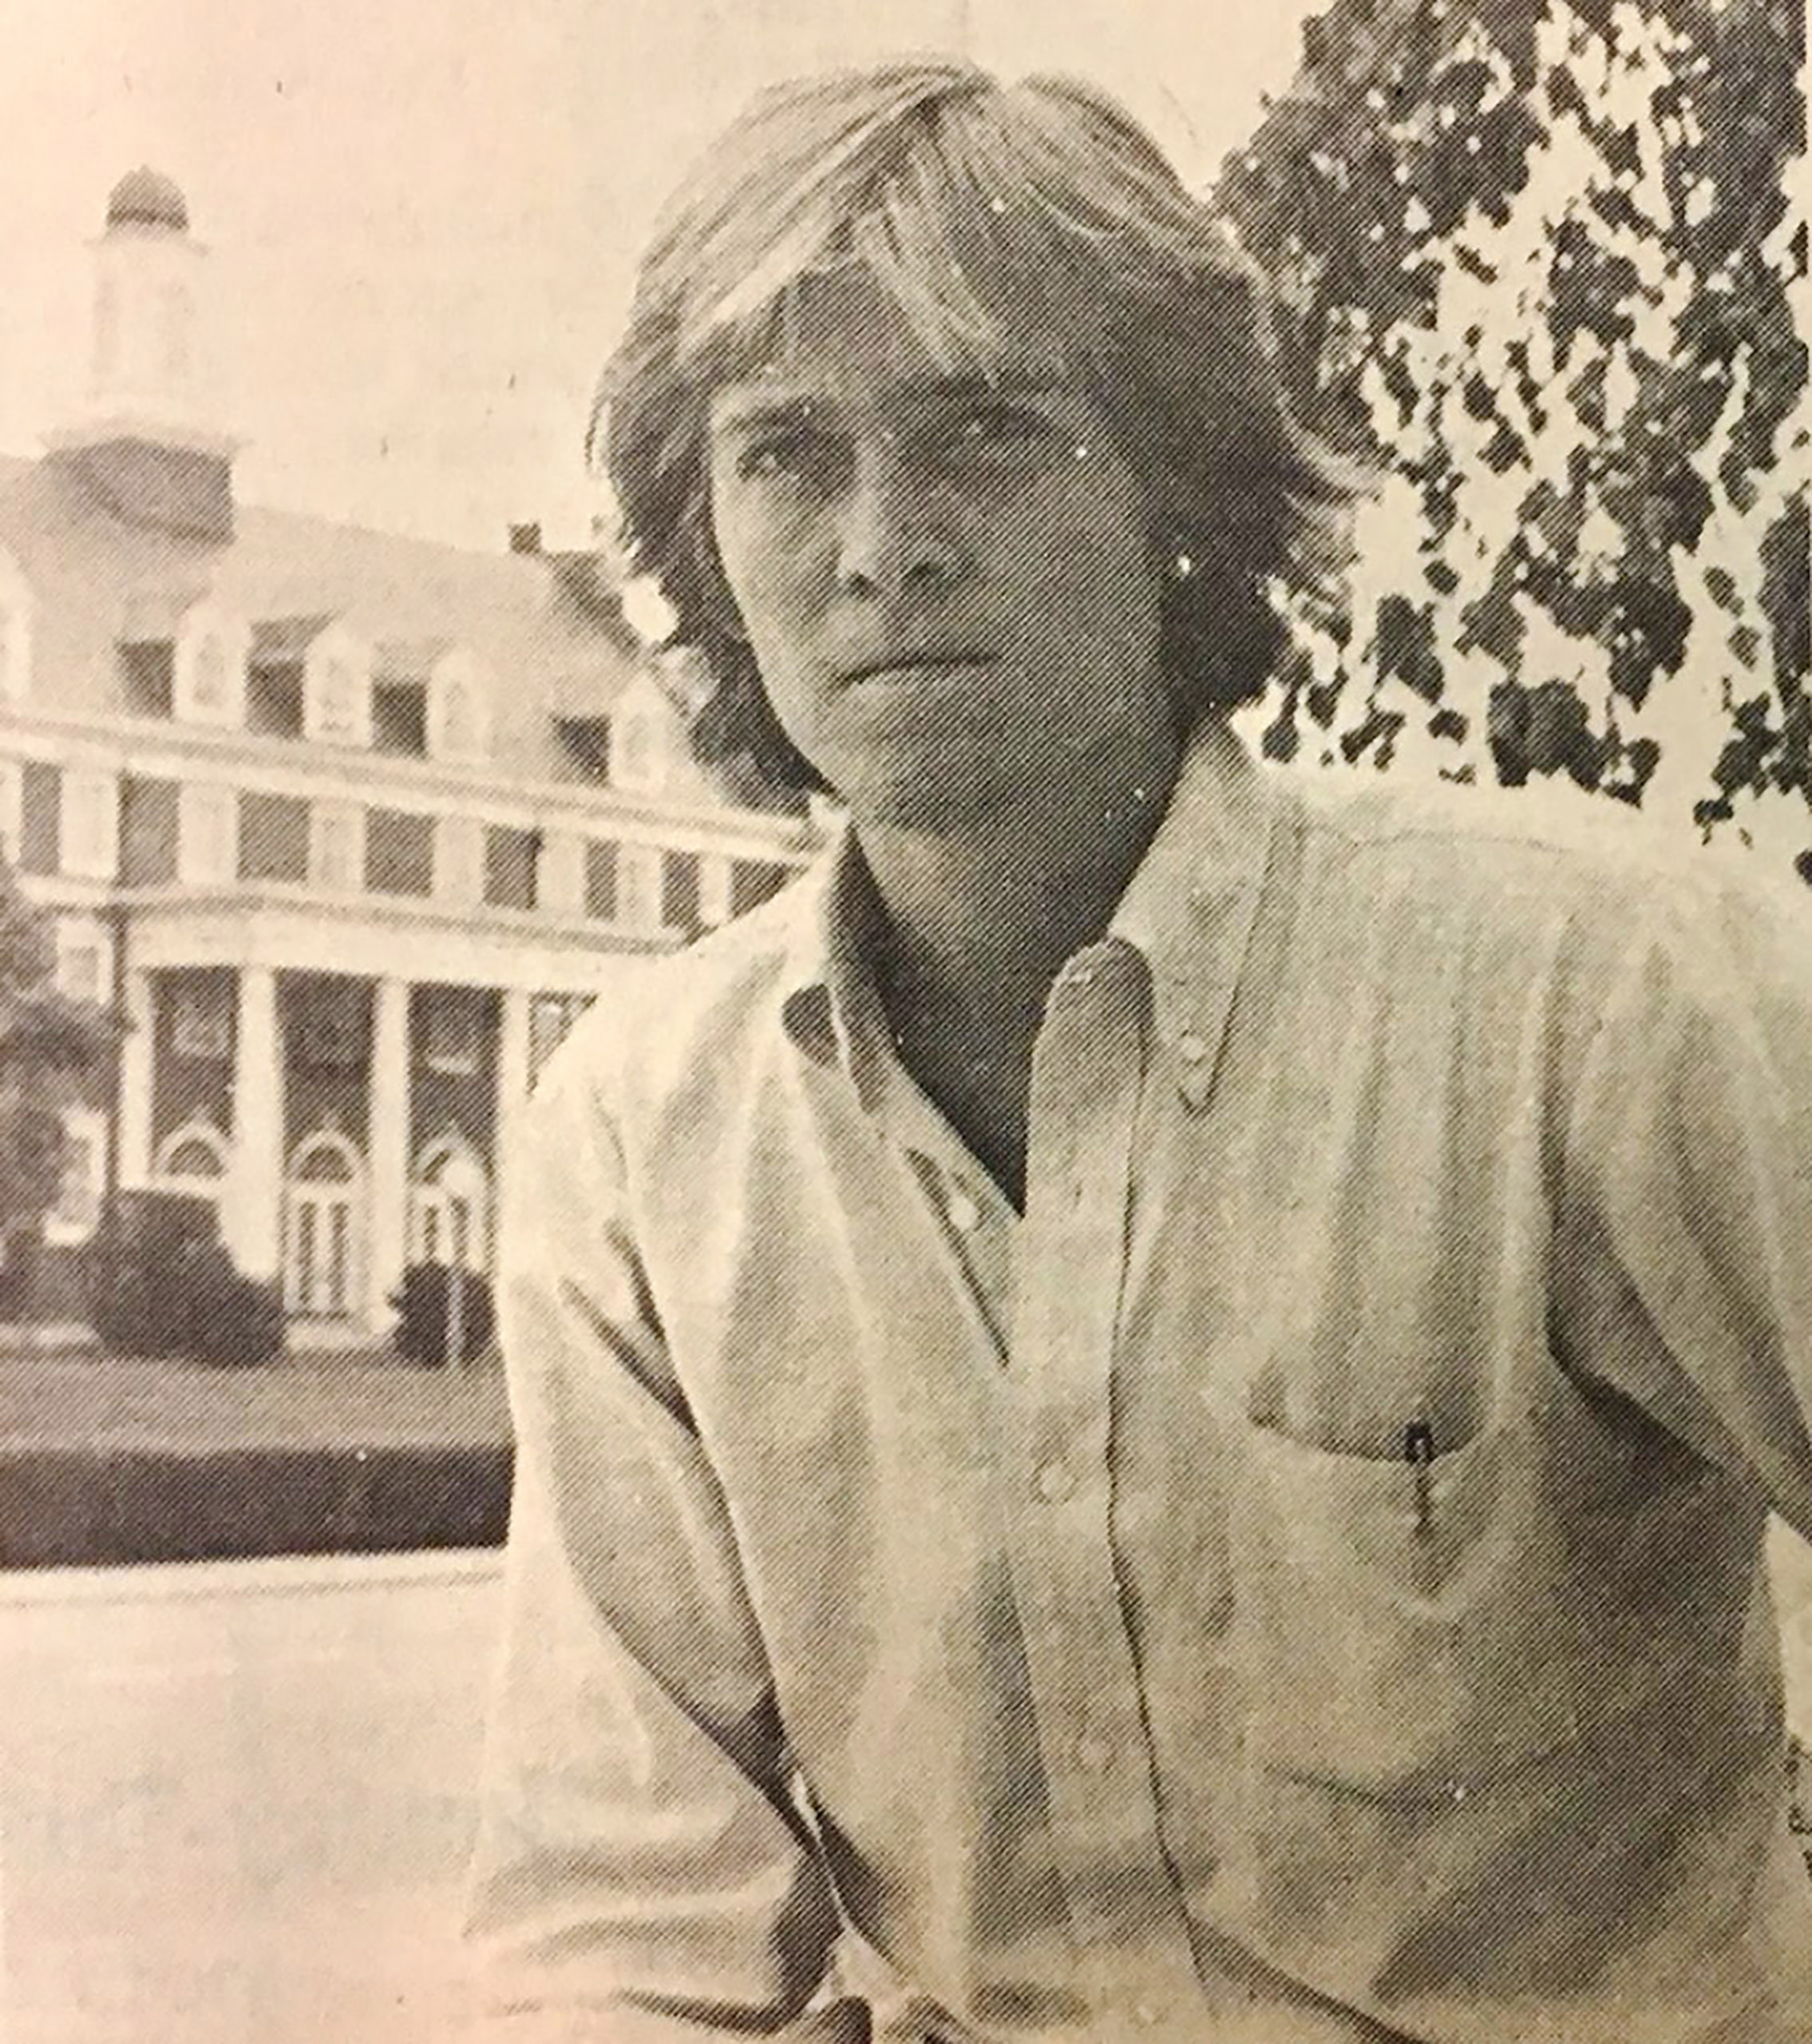 Bannon won the Student Government Association presidency during his junior year at Virginia Tech, 1975.VA.image copy.JPG